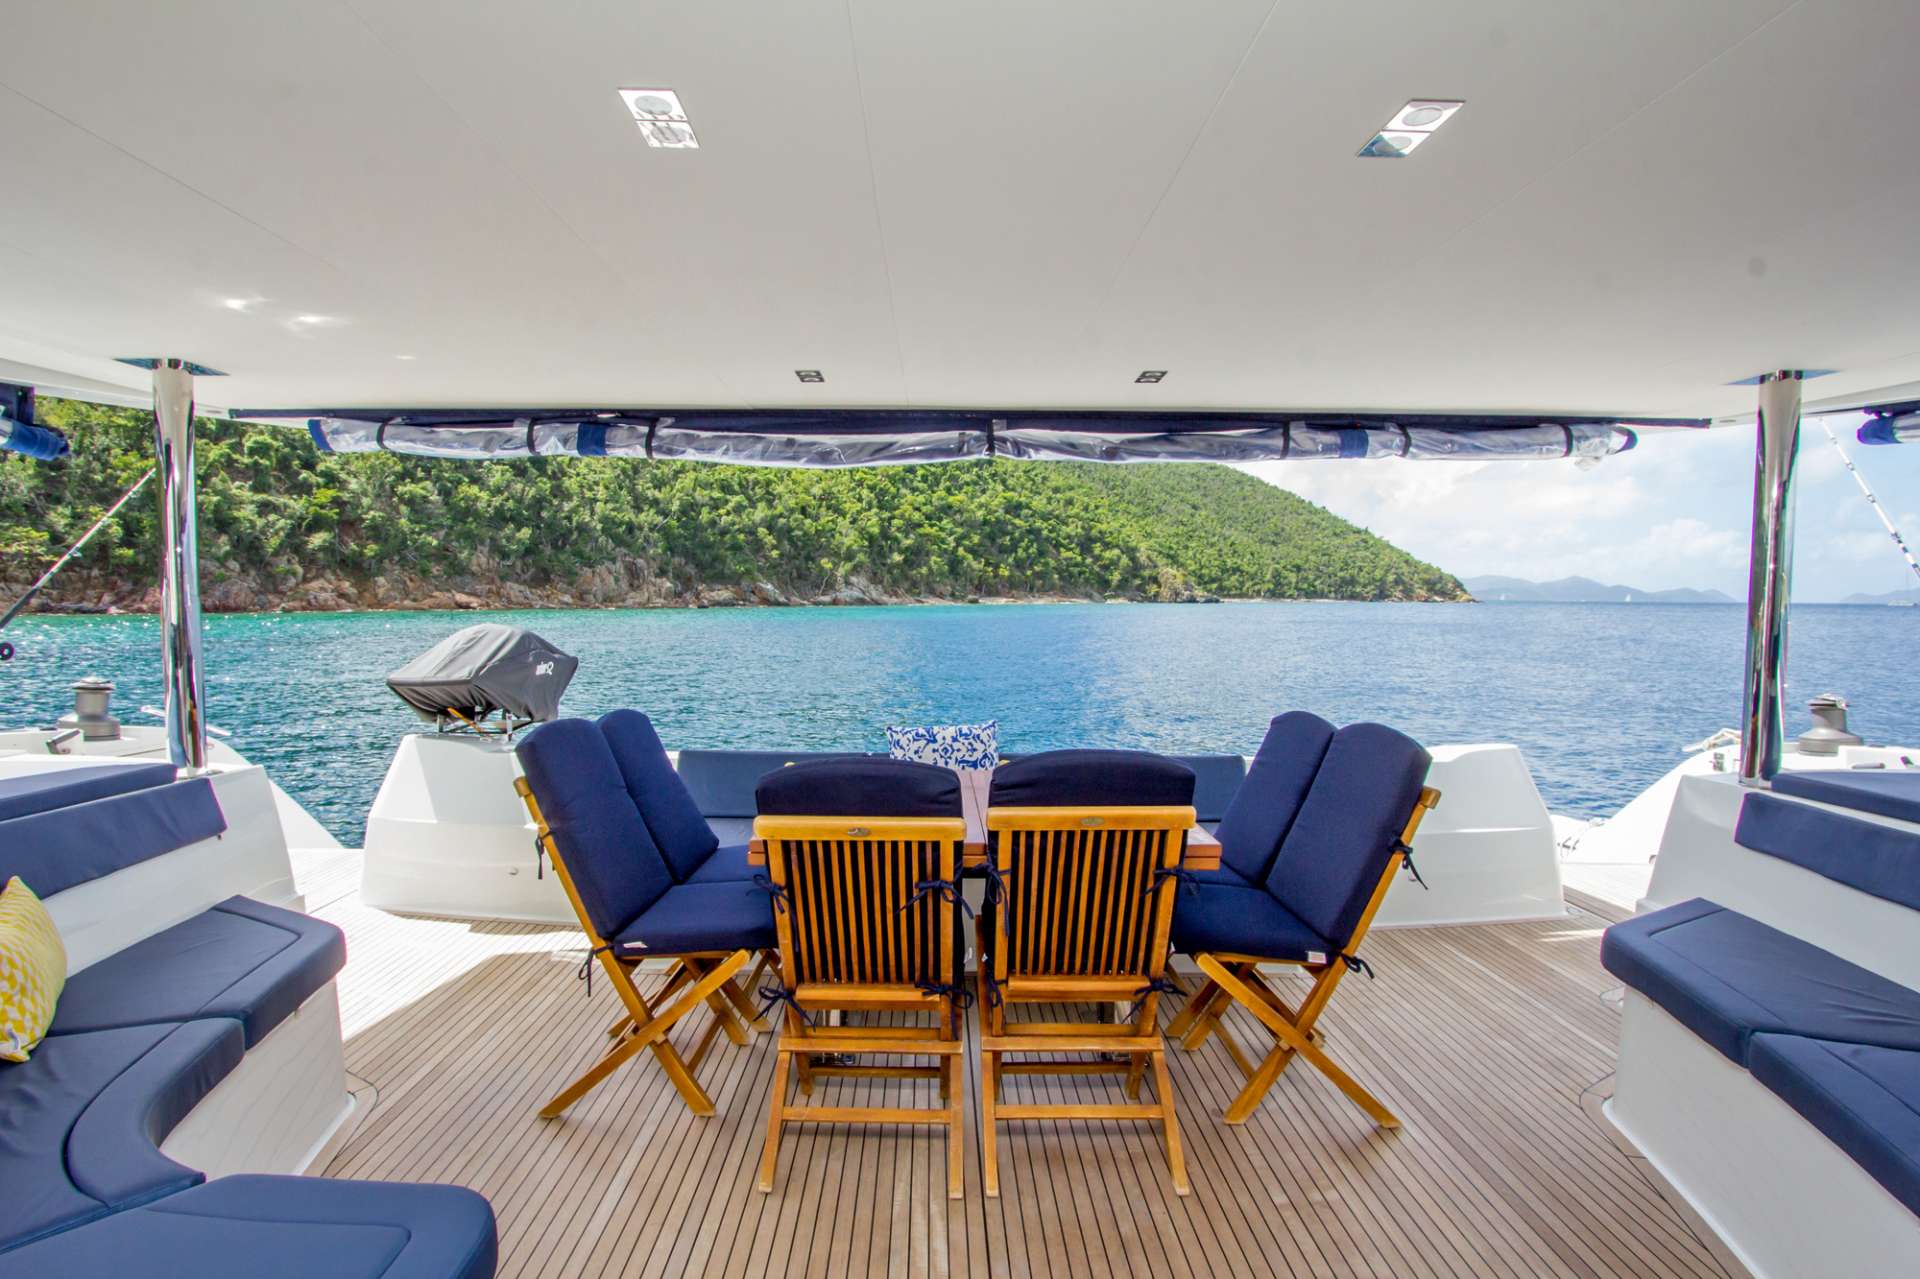 NENNE Yacht Charter - Aft Deck Dining Area